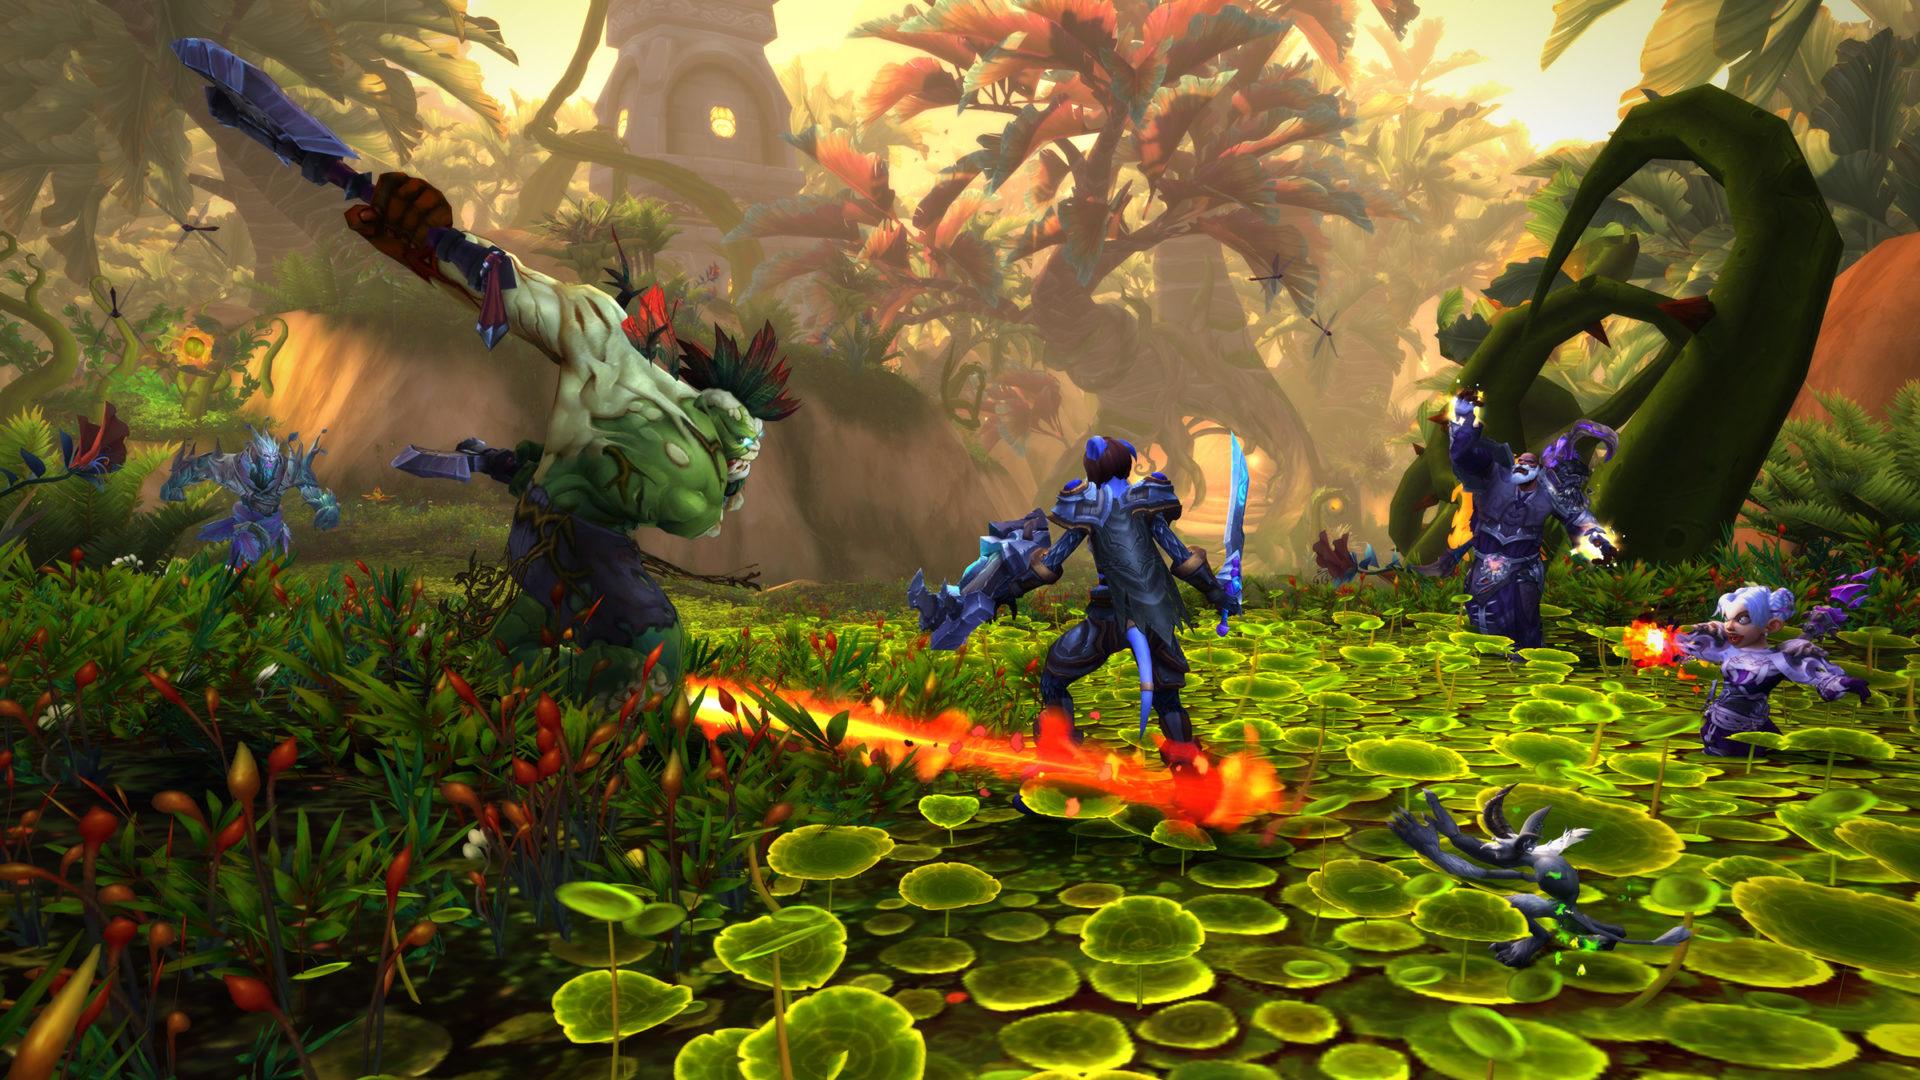 Player character fighting an enemy in Warlords of Draenor